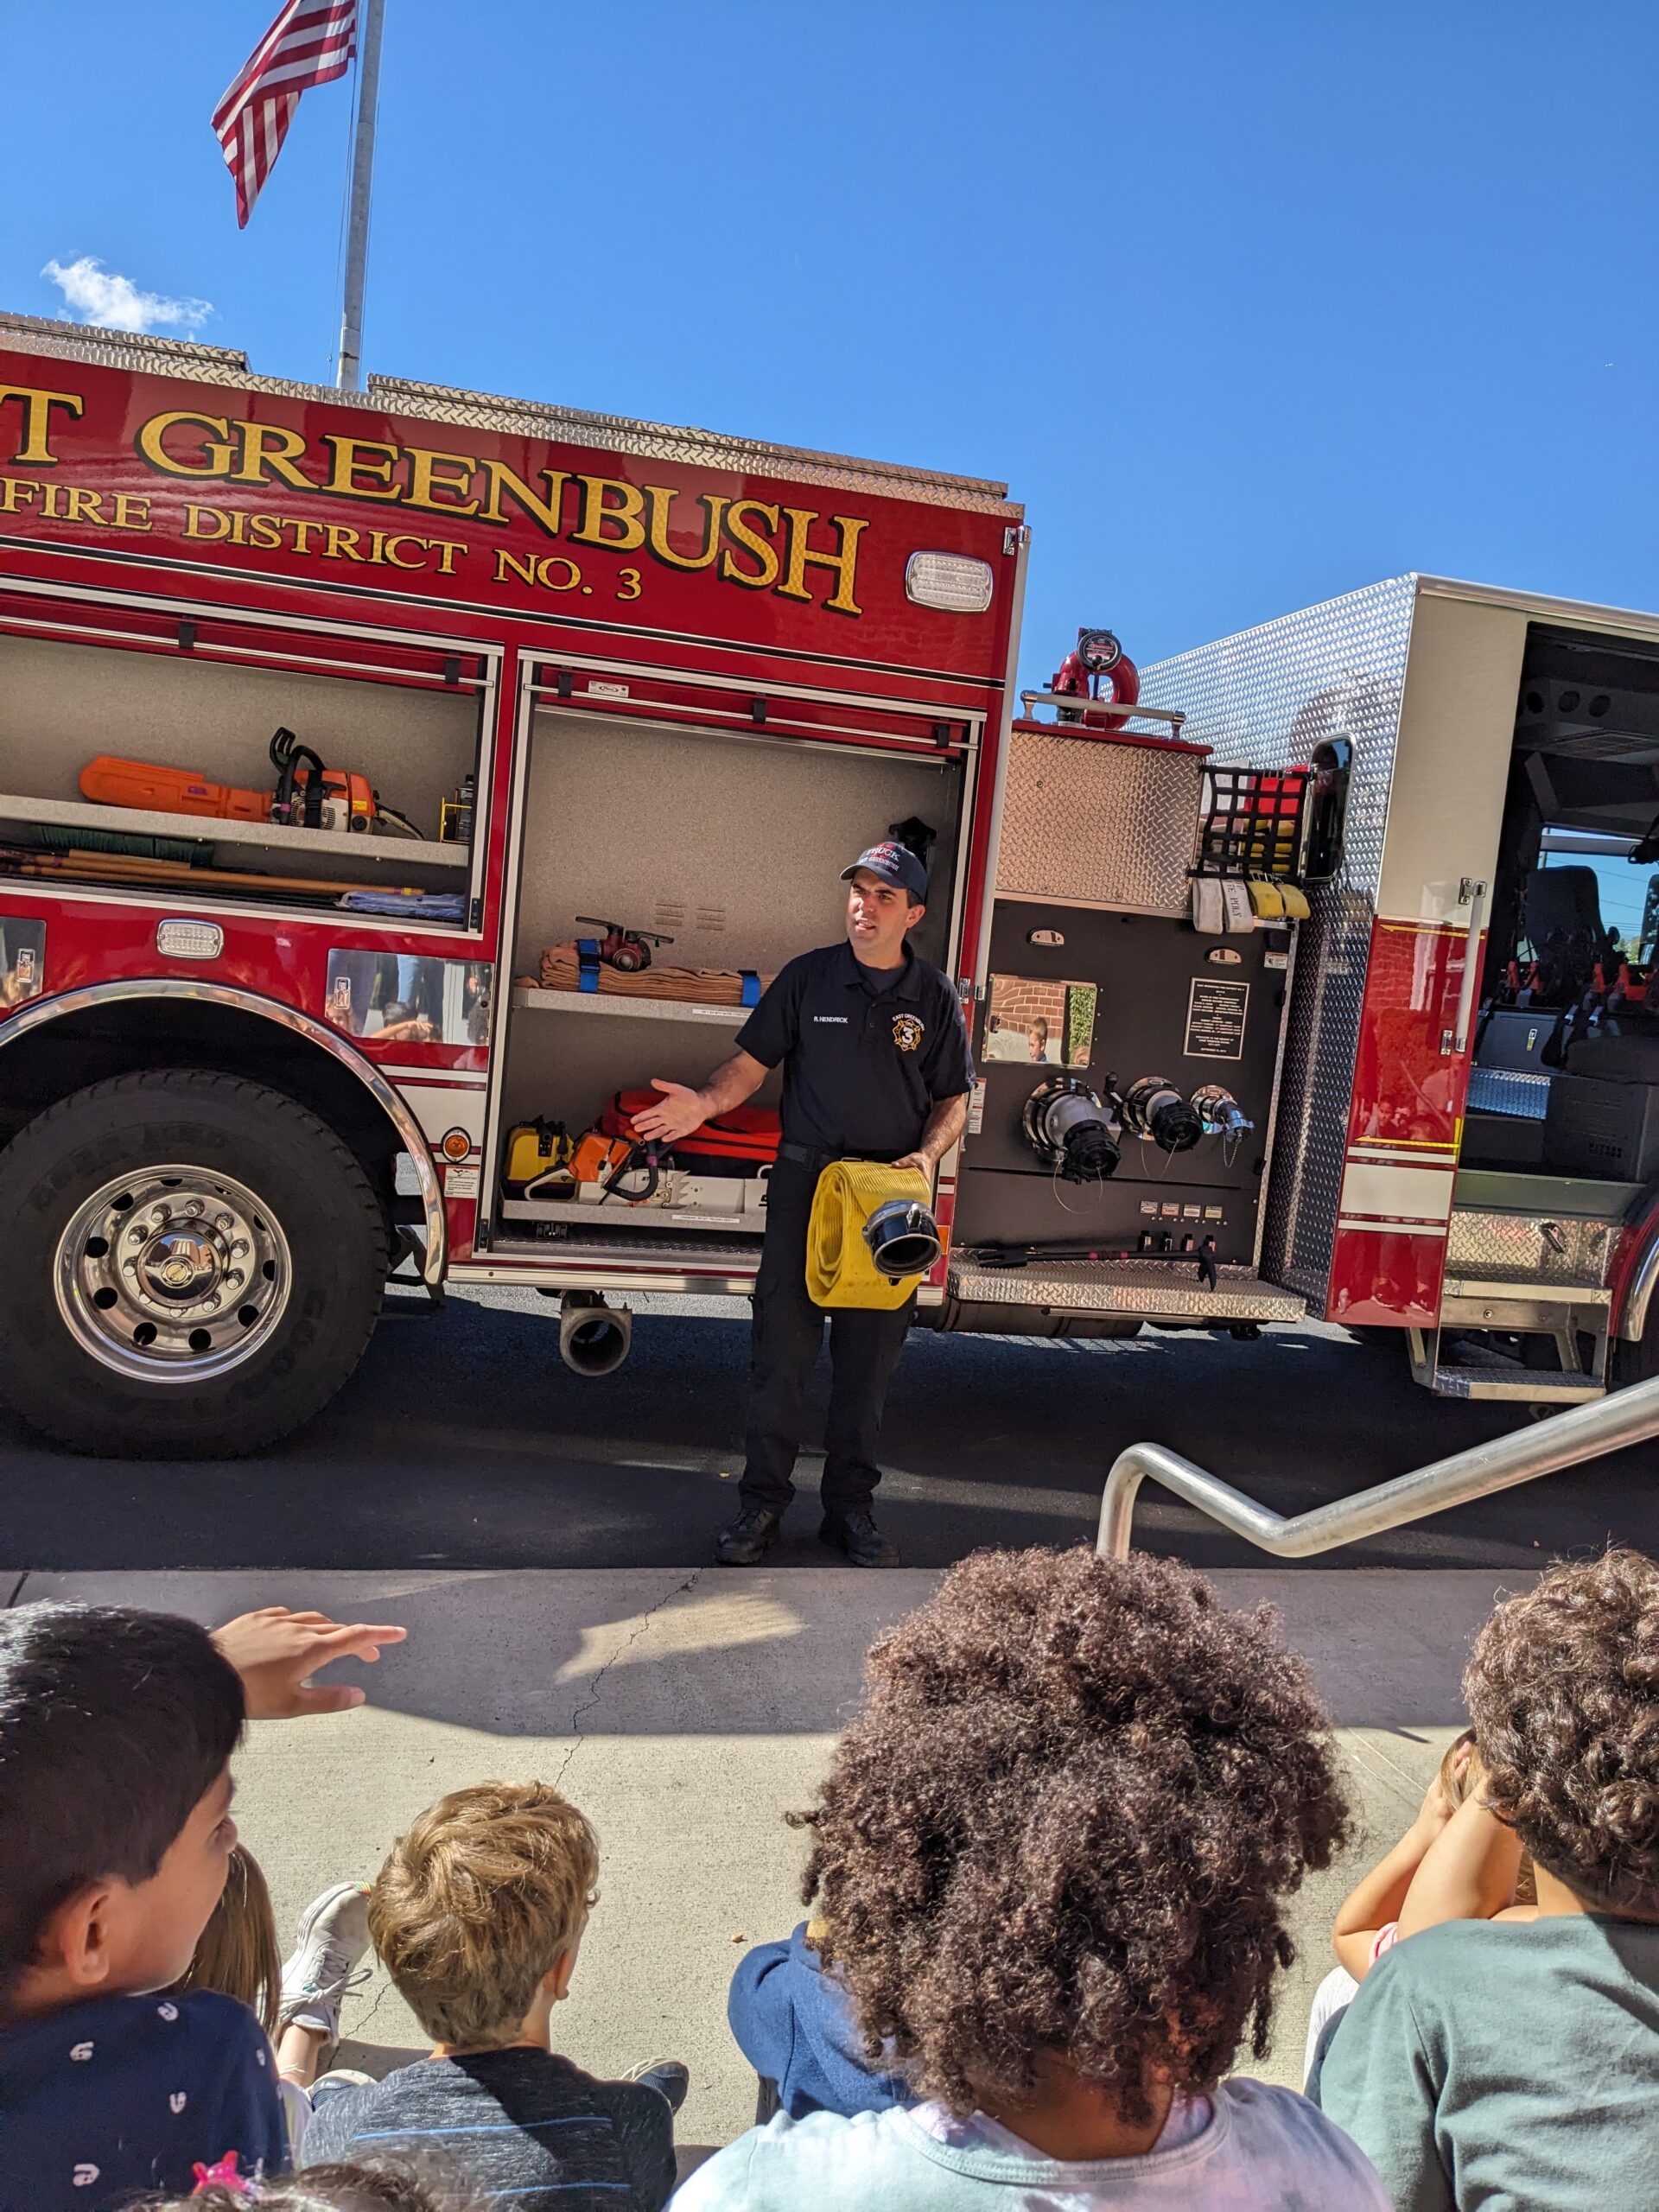 Firefighters lead fire safety talks with students.